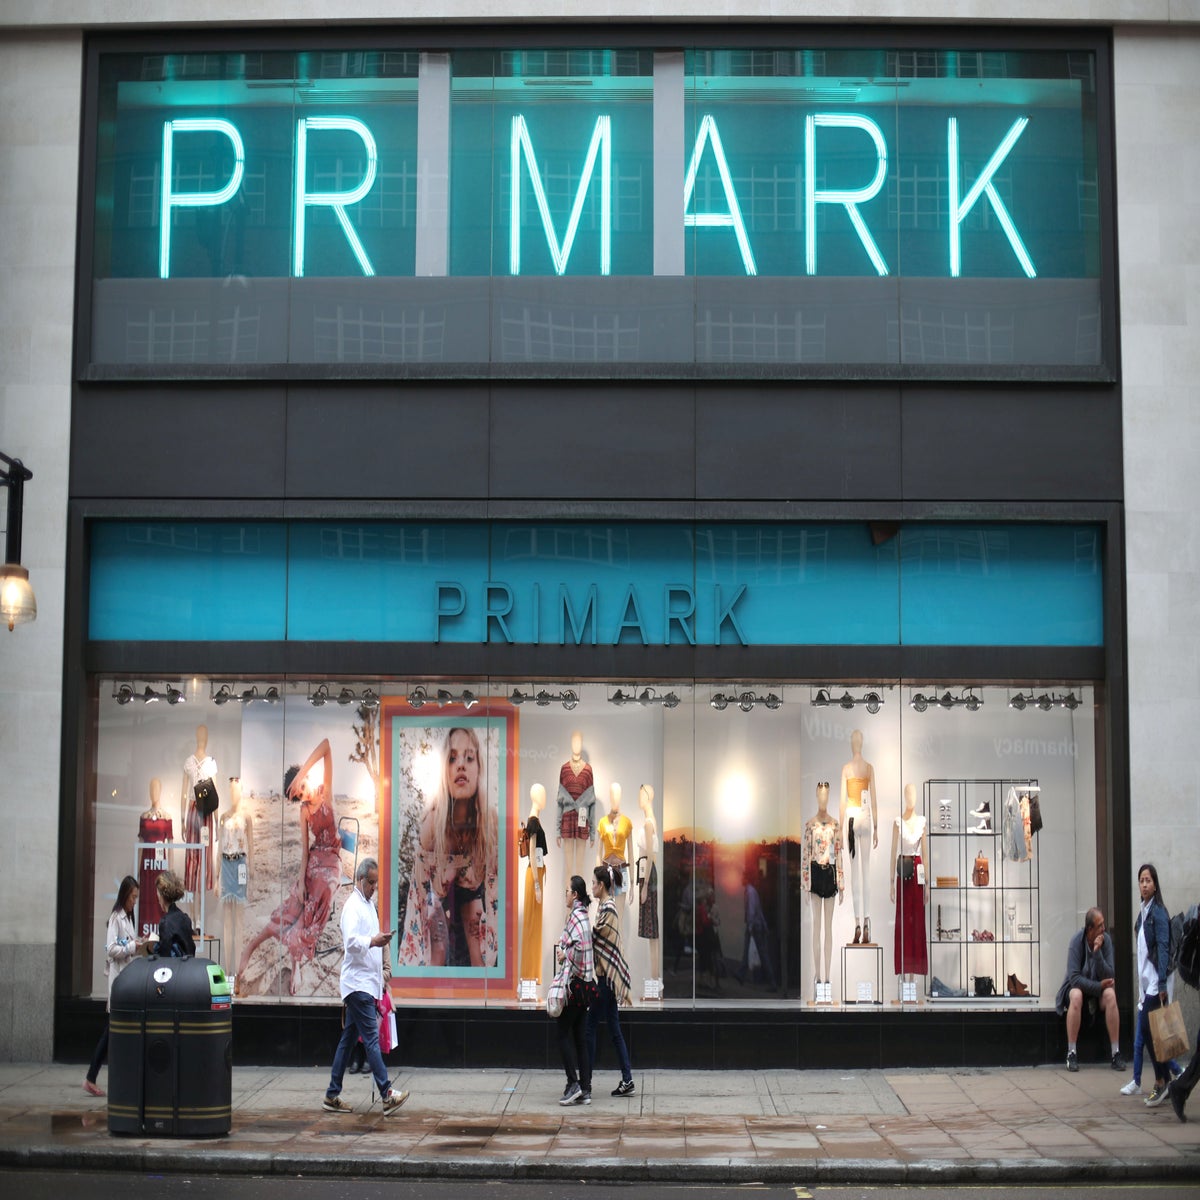 Primark pledges to make sustainable clothing 'affordable to all